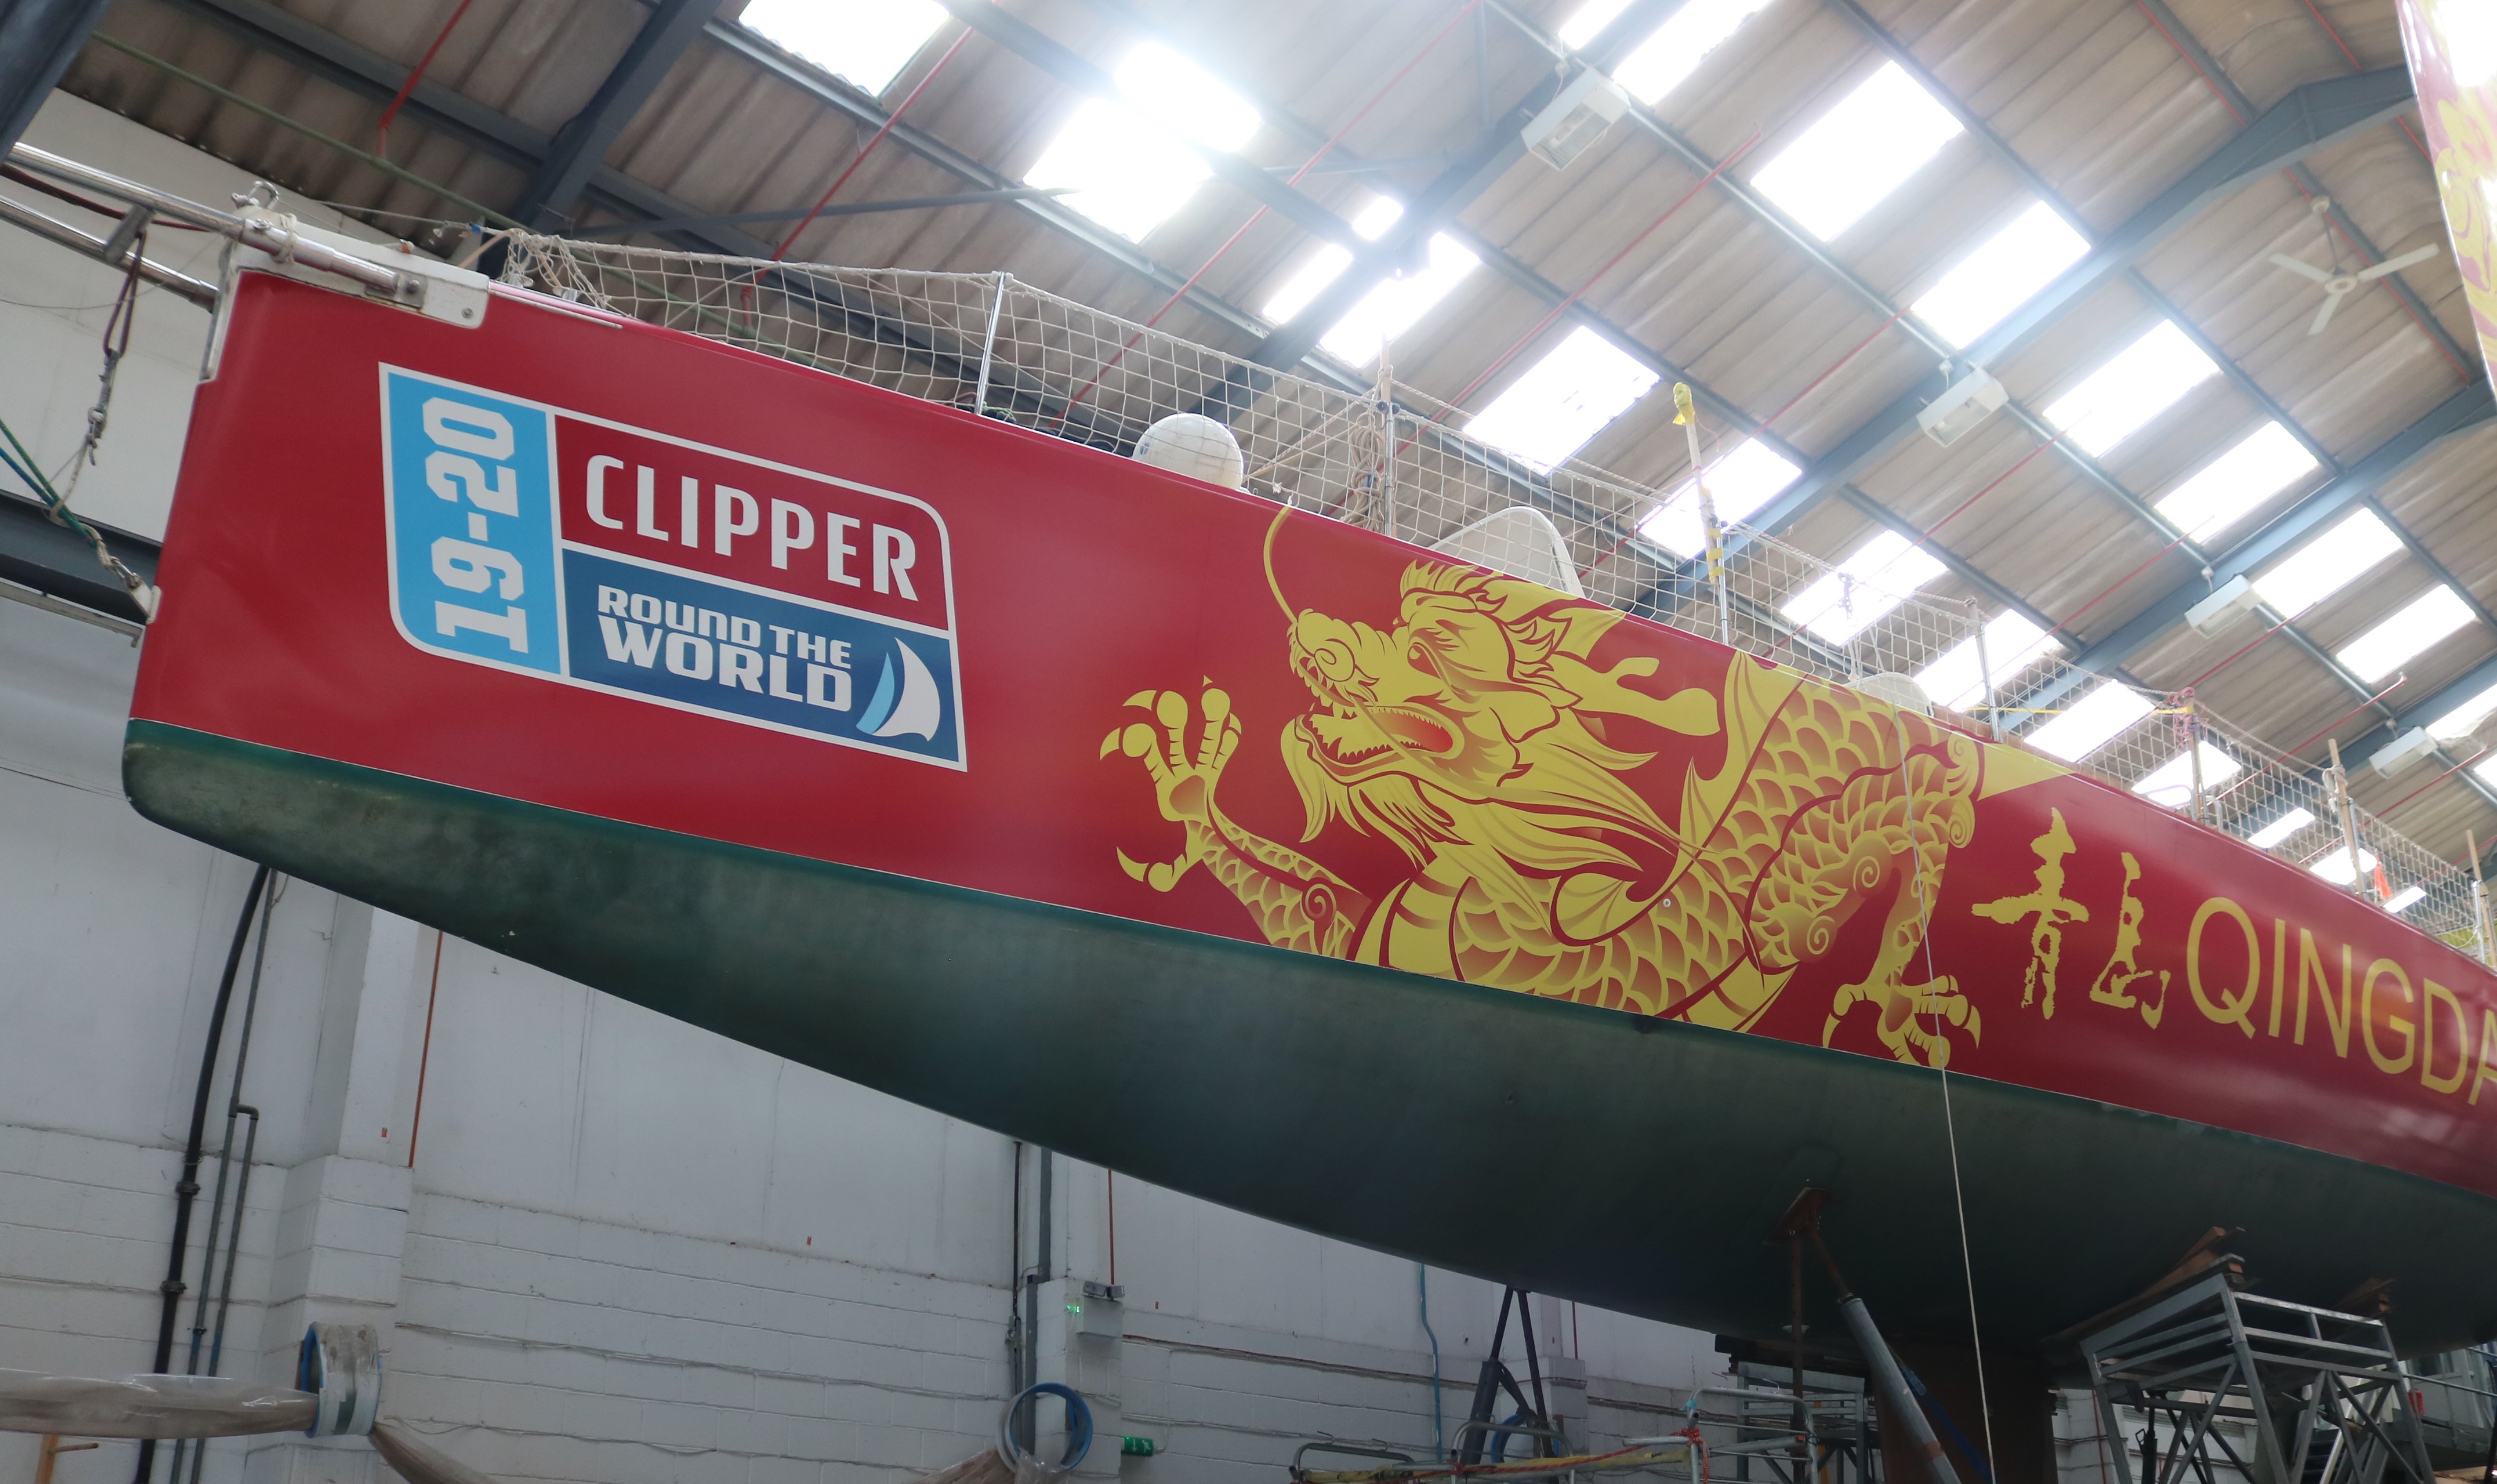 The newly branded Qingdao yacht for the Clipper 2019-20 Race